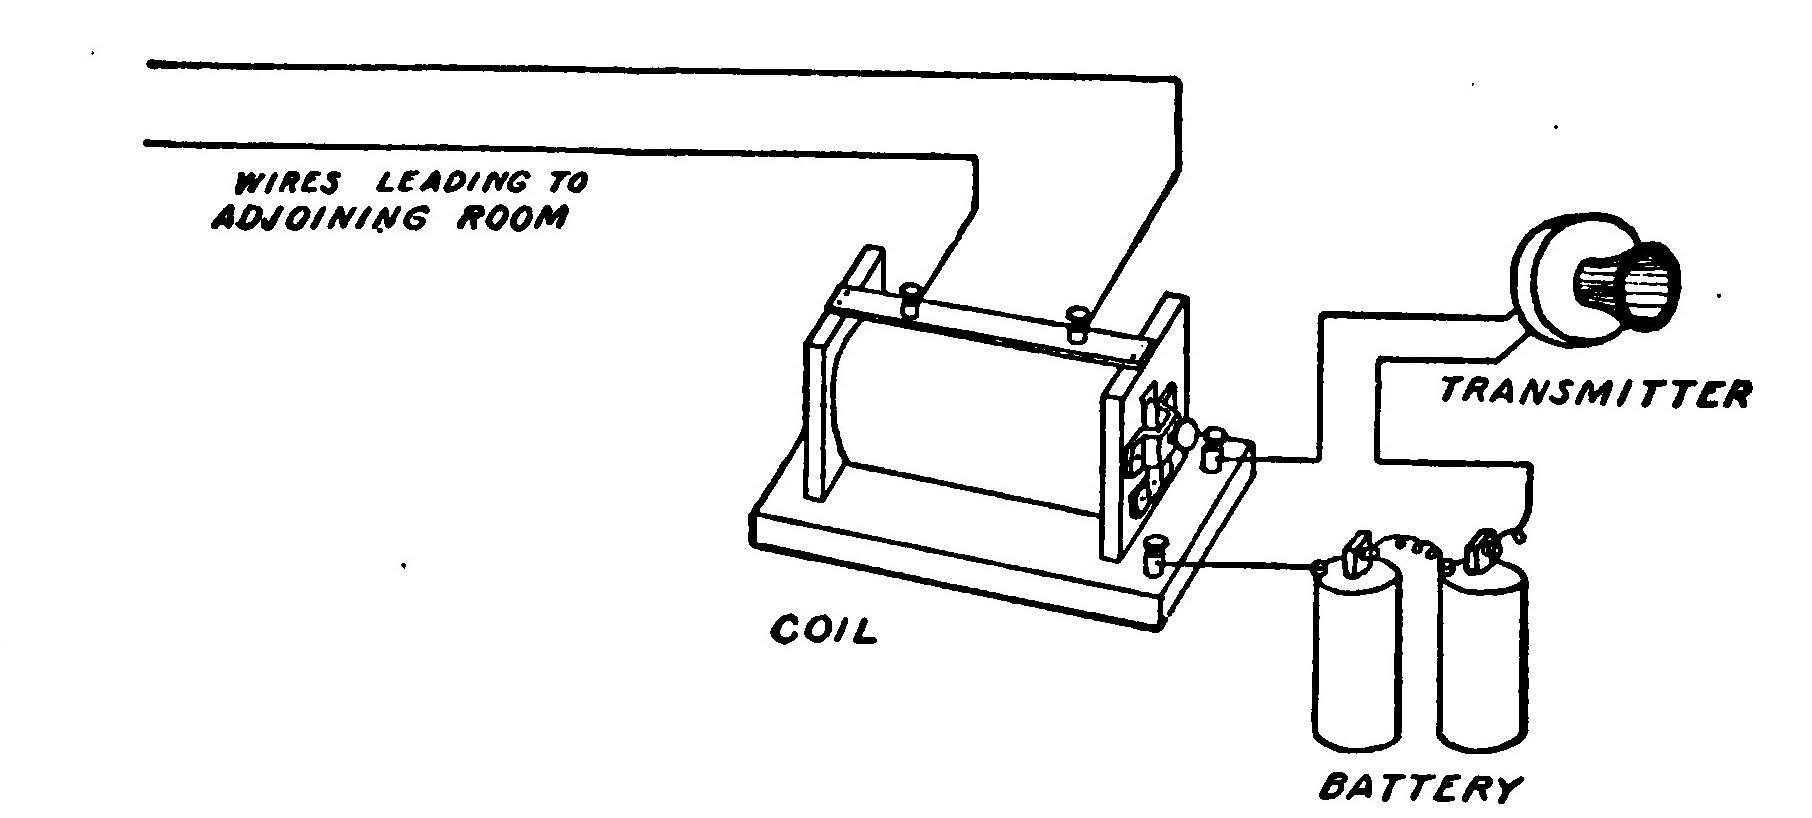 Fig. 167.—Diagram showing how to connect the Apparatus for the "Electric Hands" Experiment.